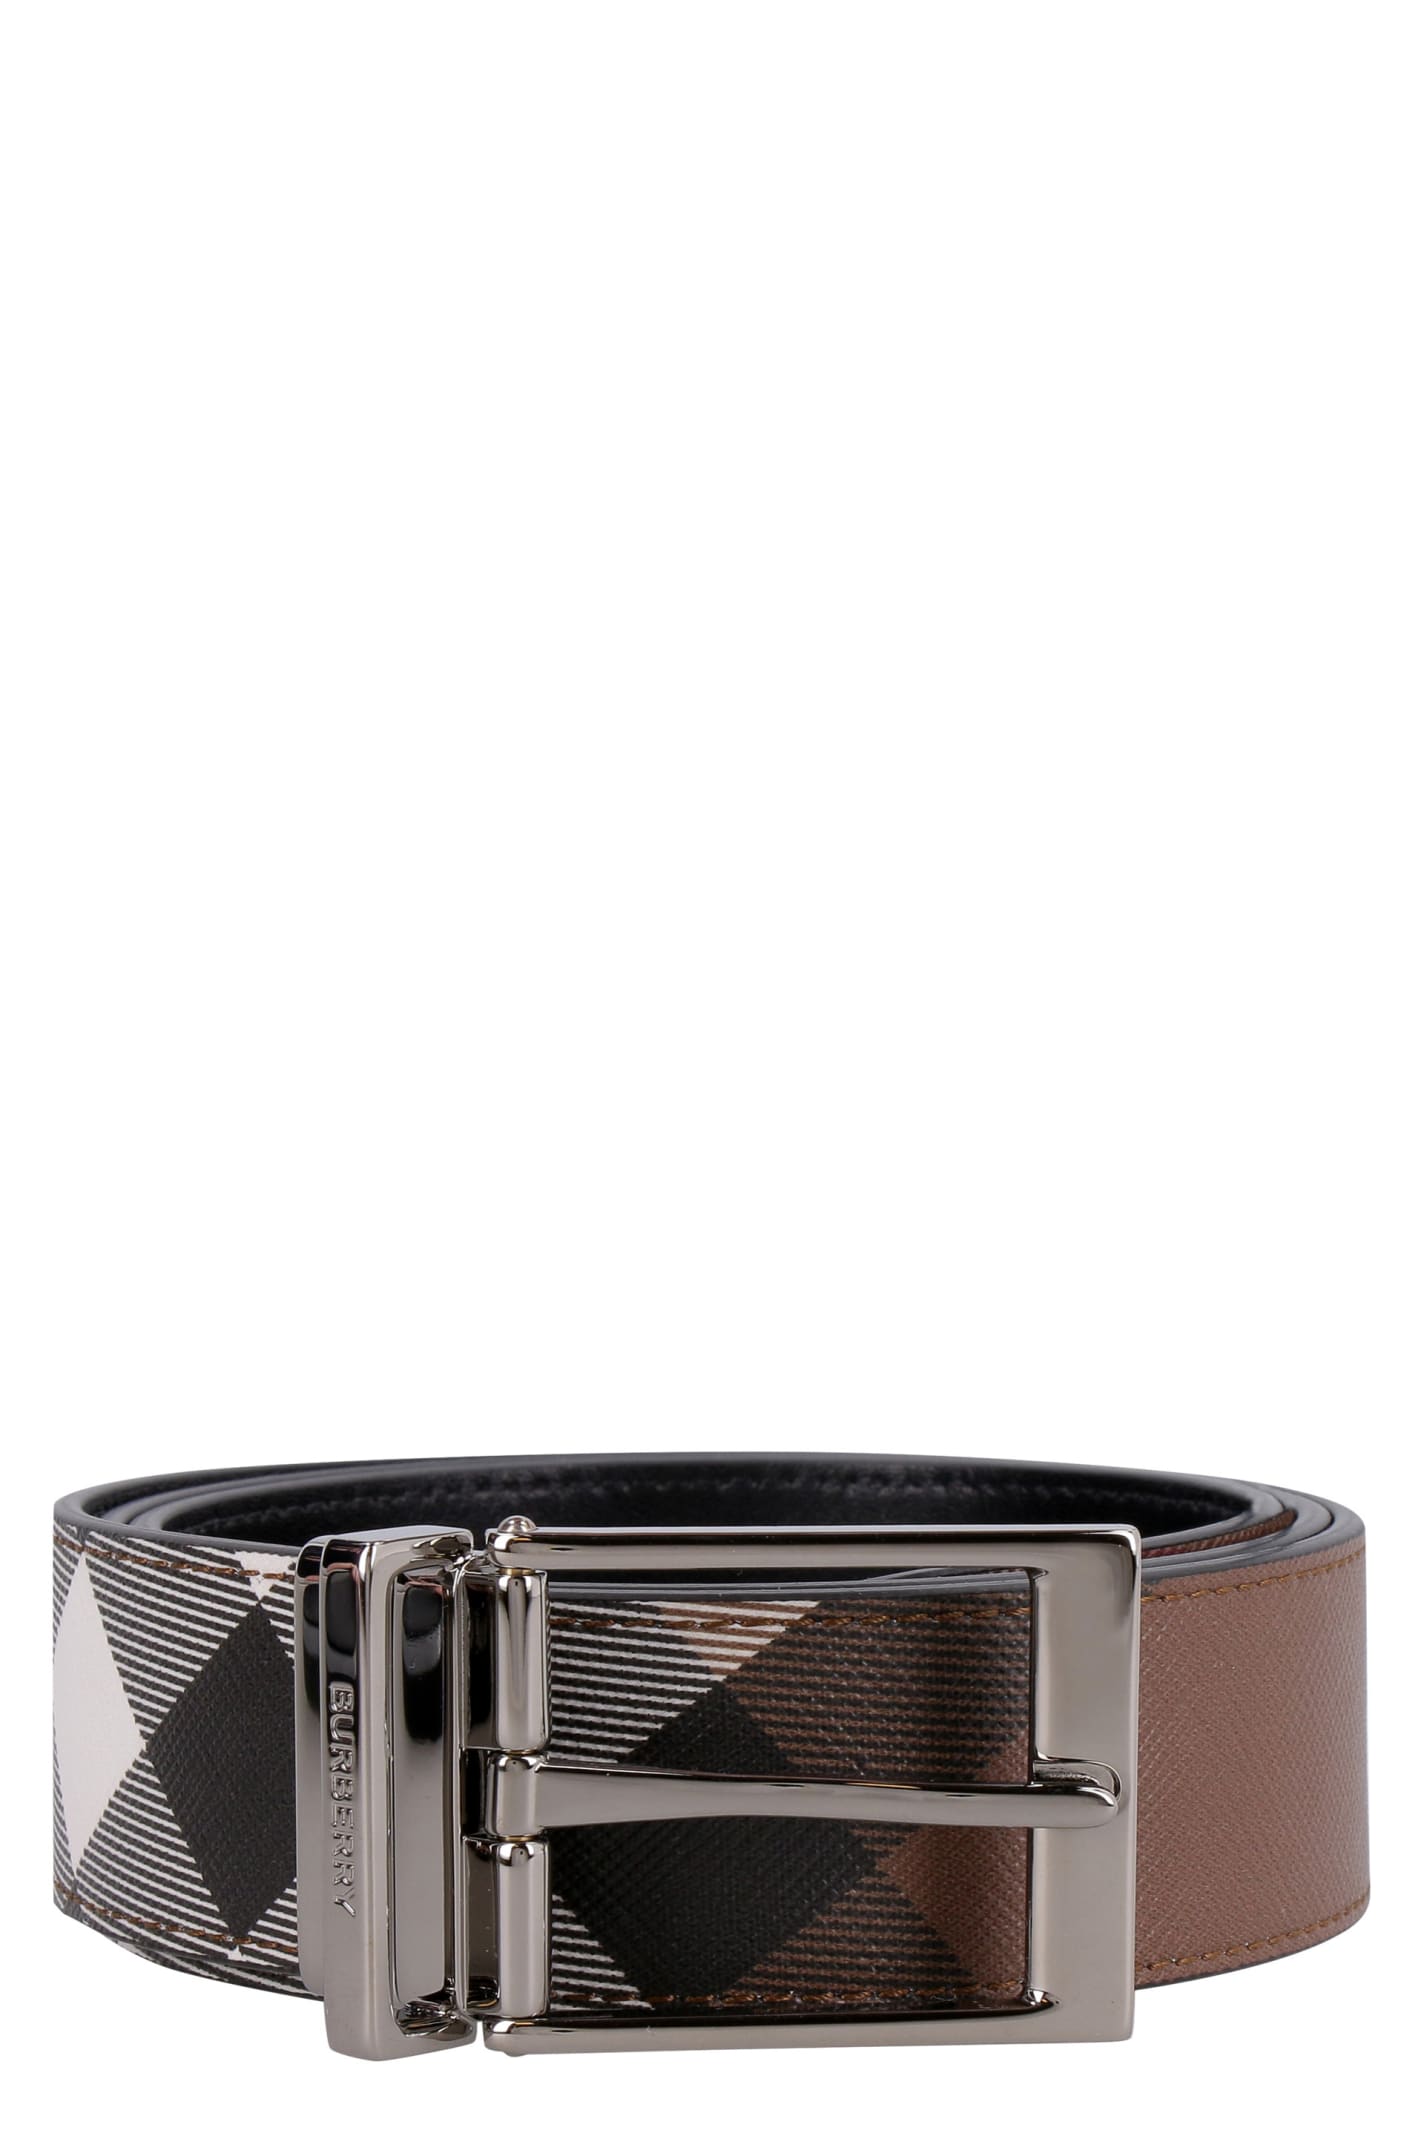 Burberry Belt With Buckle In Multicolor